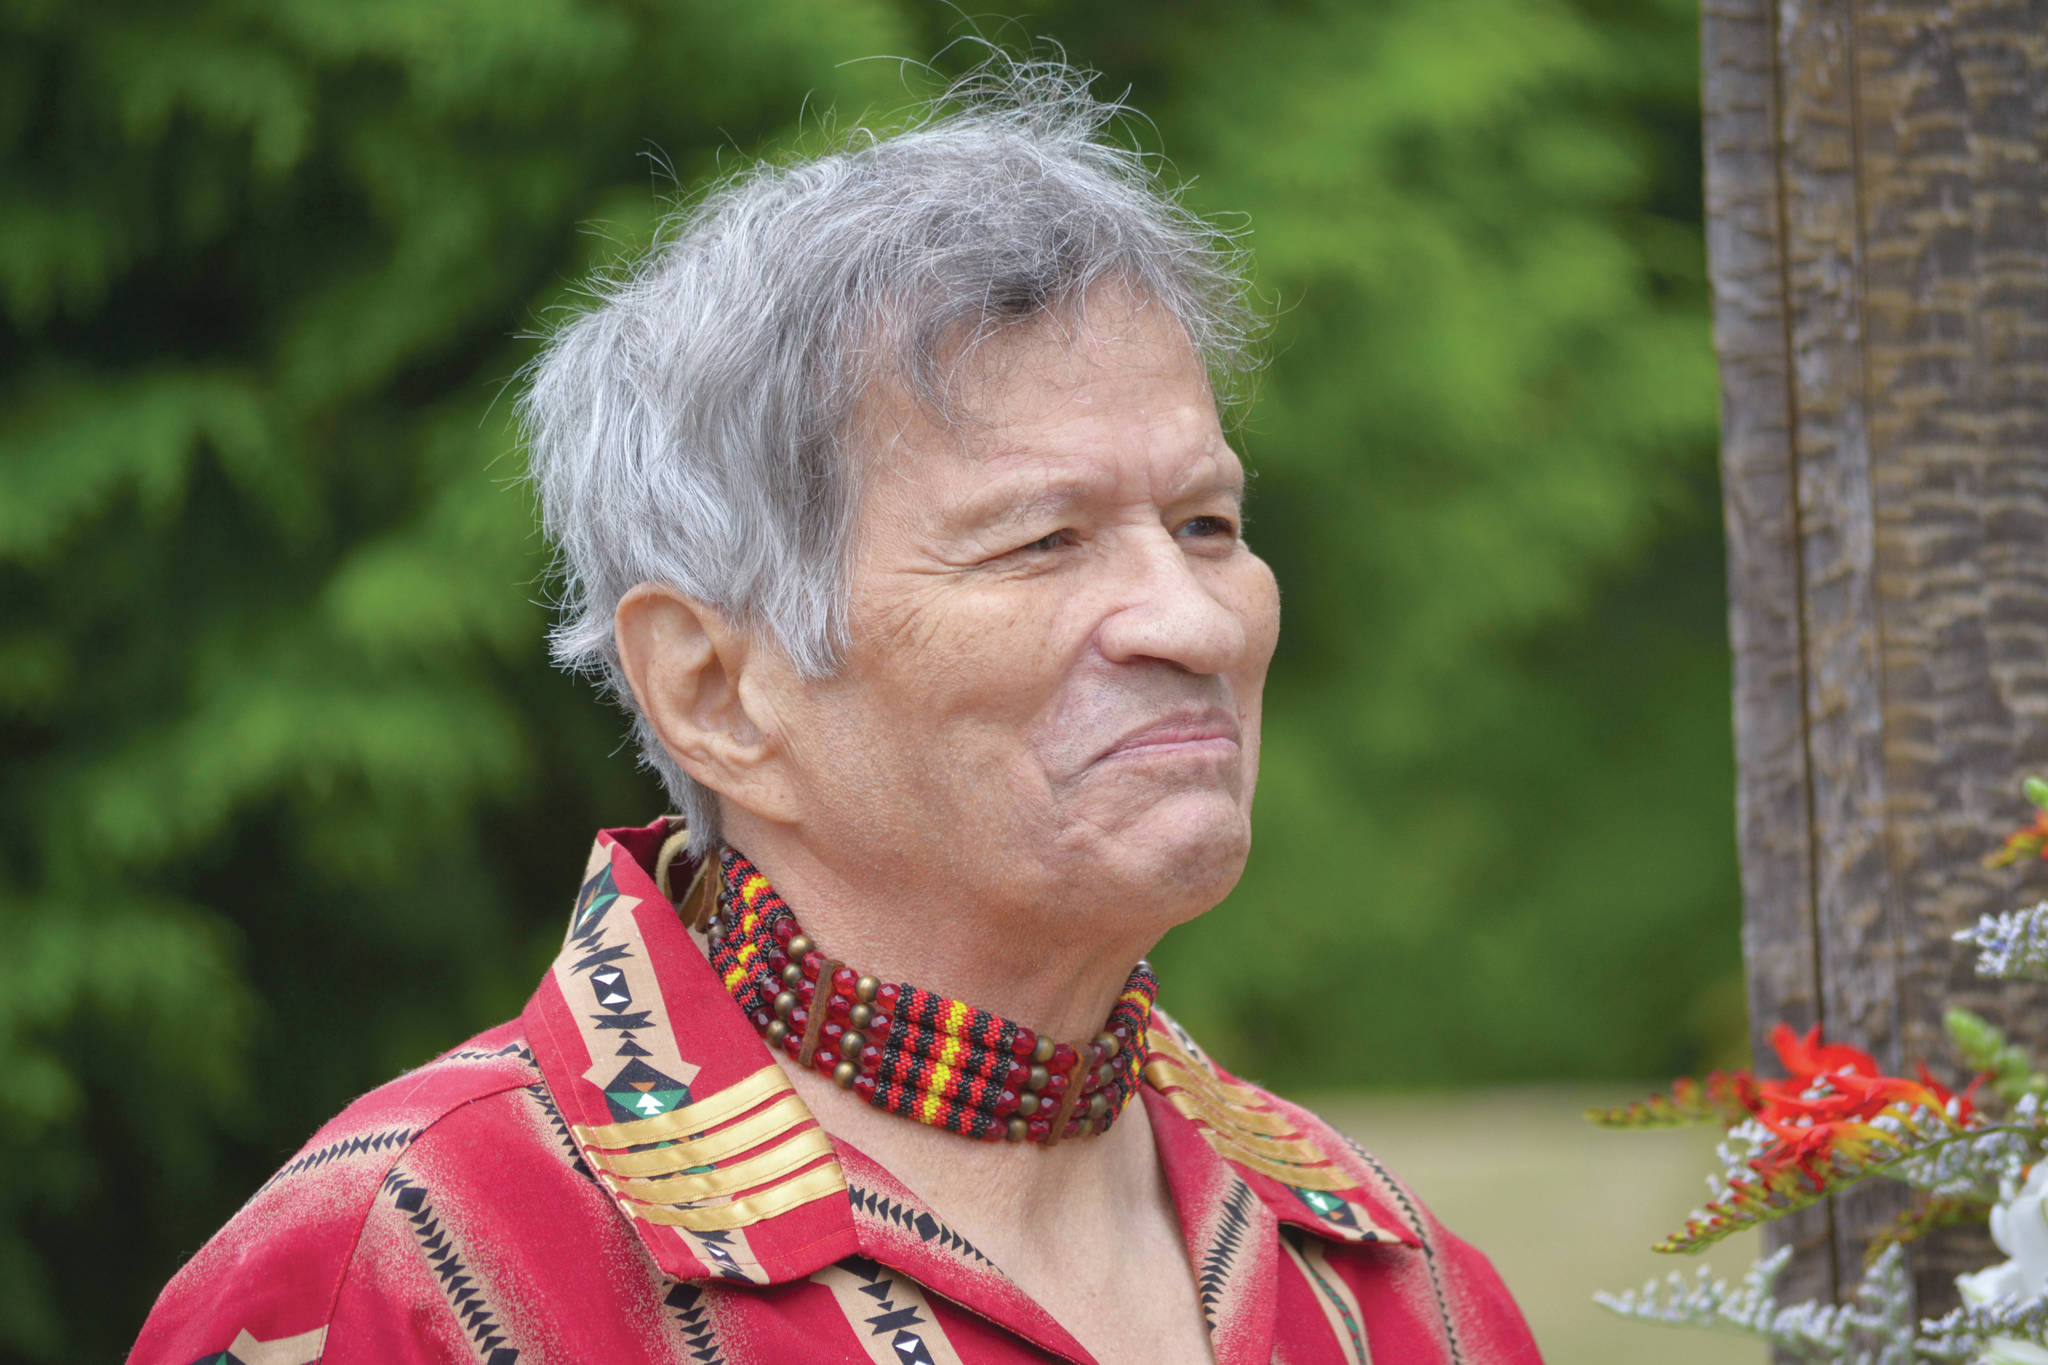 The Suquamish Tribe laid to rest former Suquamish Tribal Chairman Richard Belmont Jr. on what would have been his 82nd birthday on July 24.